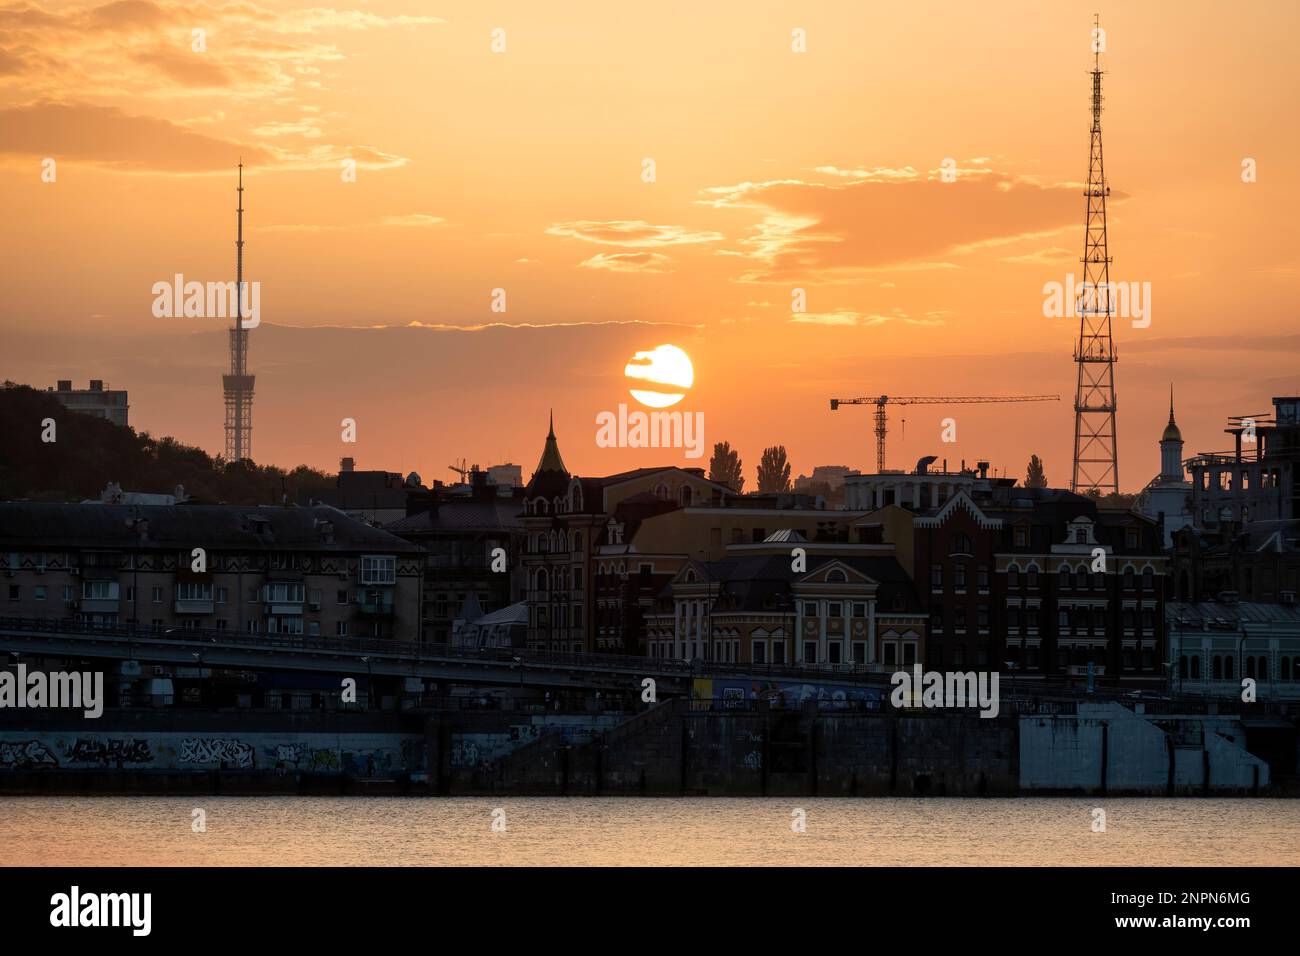 Sunset in Kyiv with a view of Podil downtown district and Dnipro river on the foreground Stock Photo